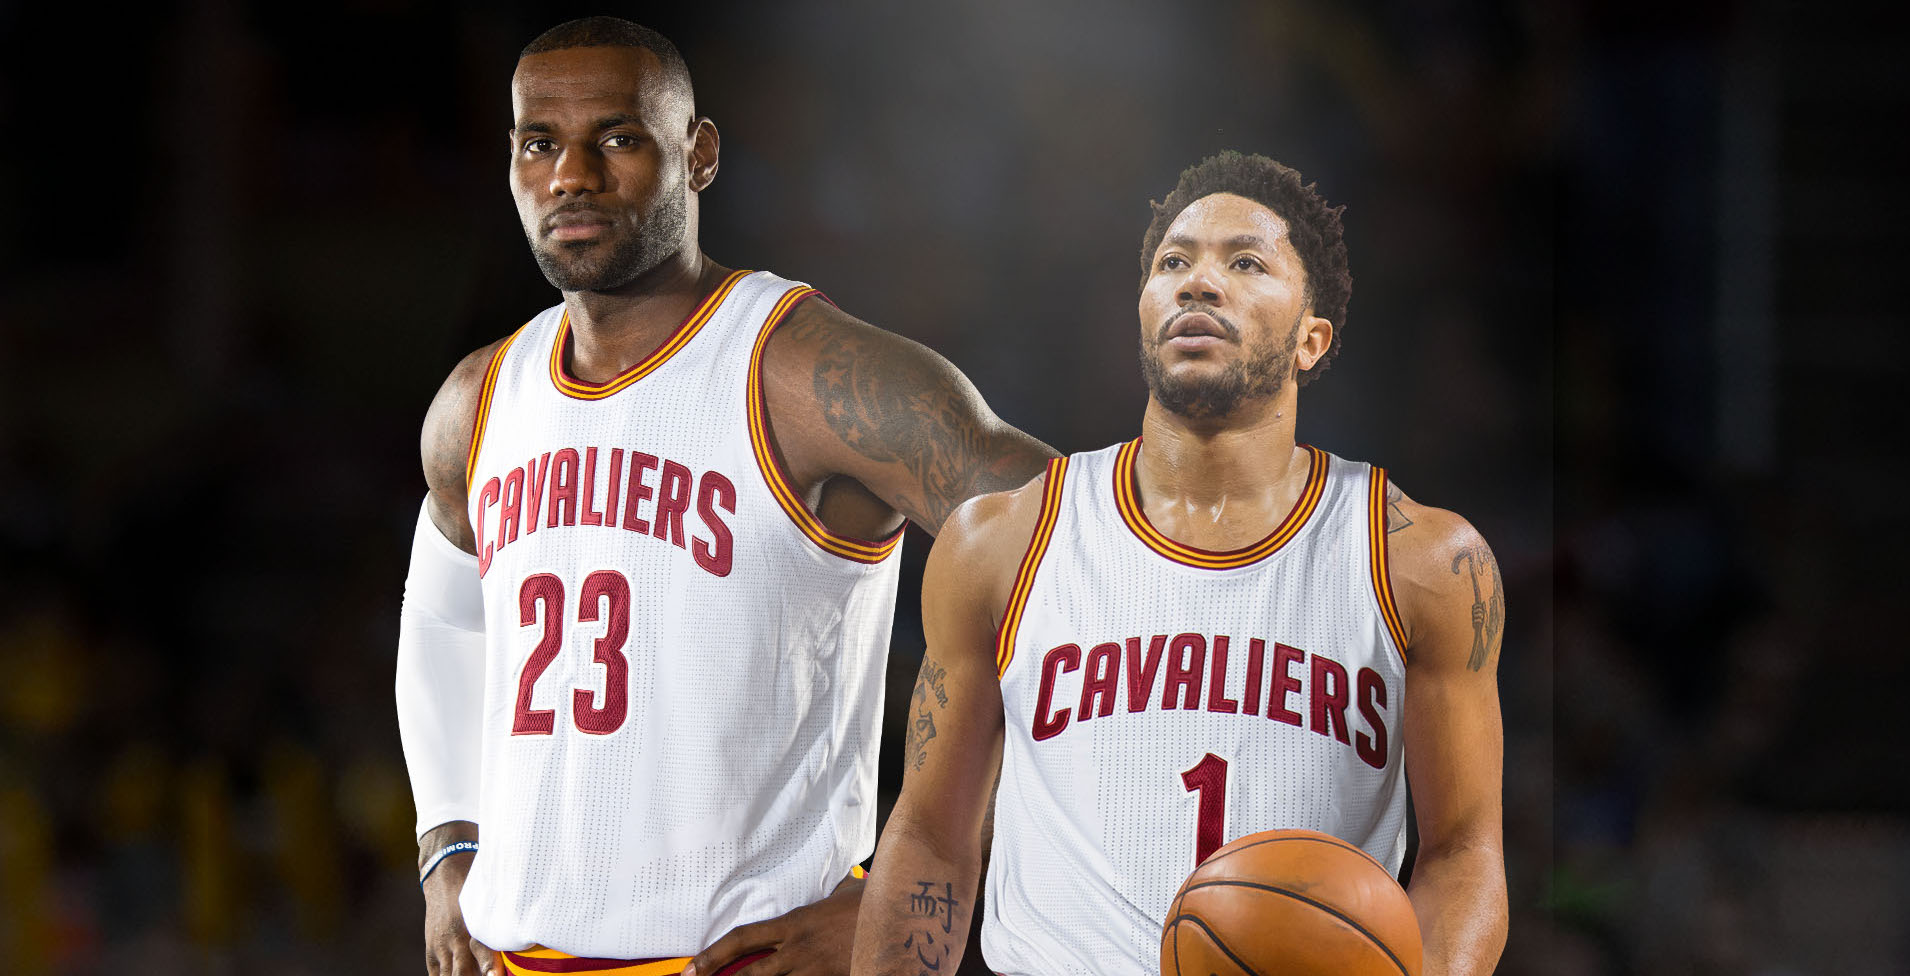 Derrick Rose learned much from LeBron James during their time as